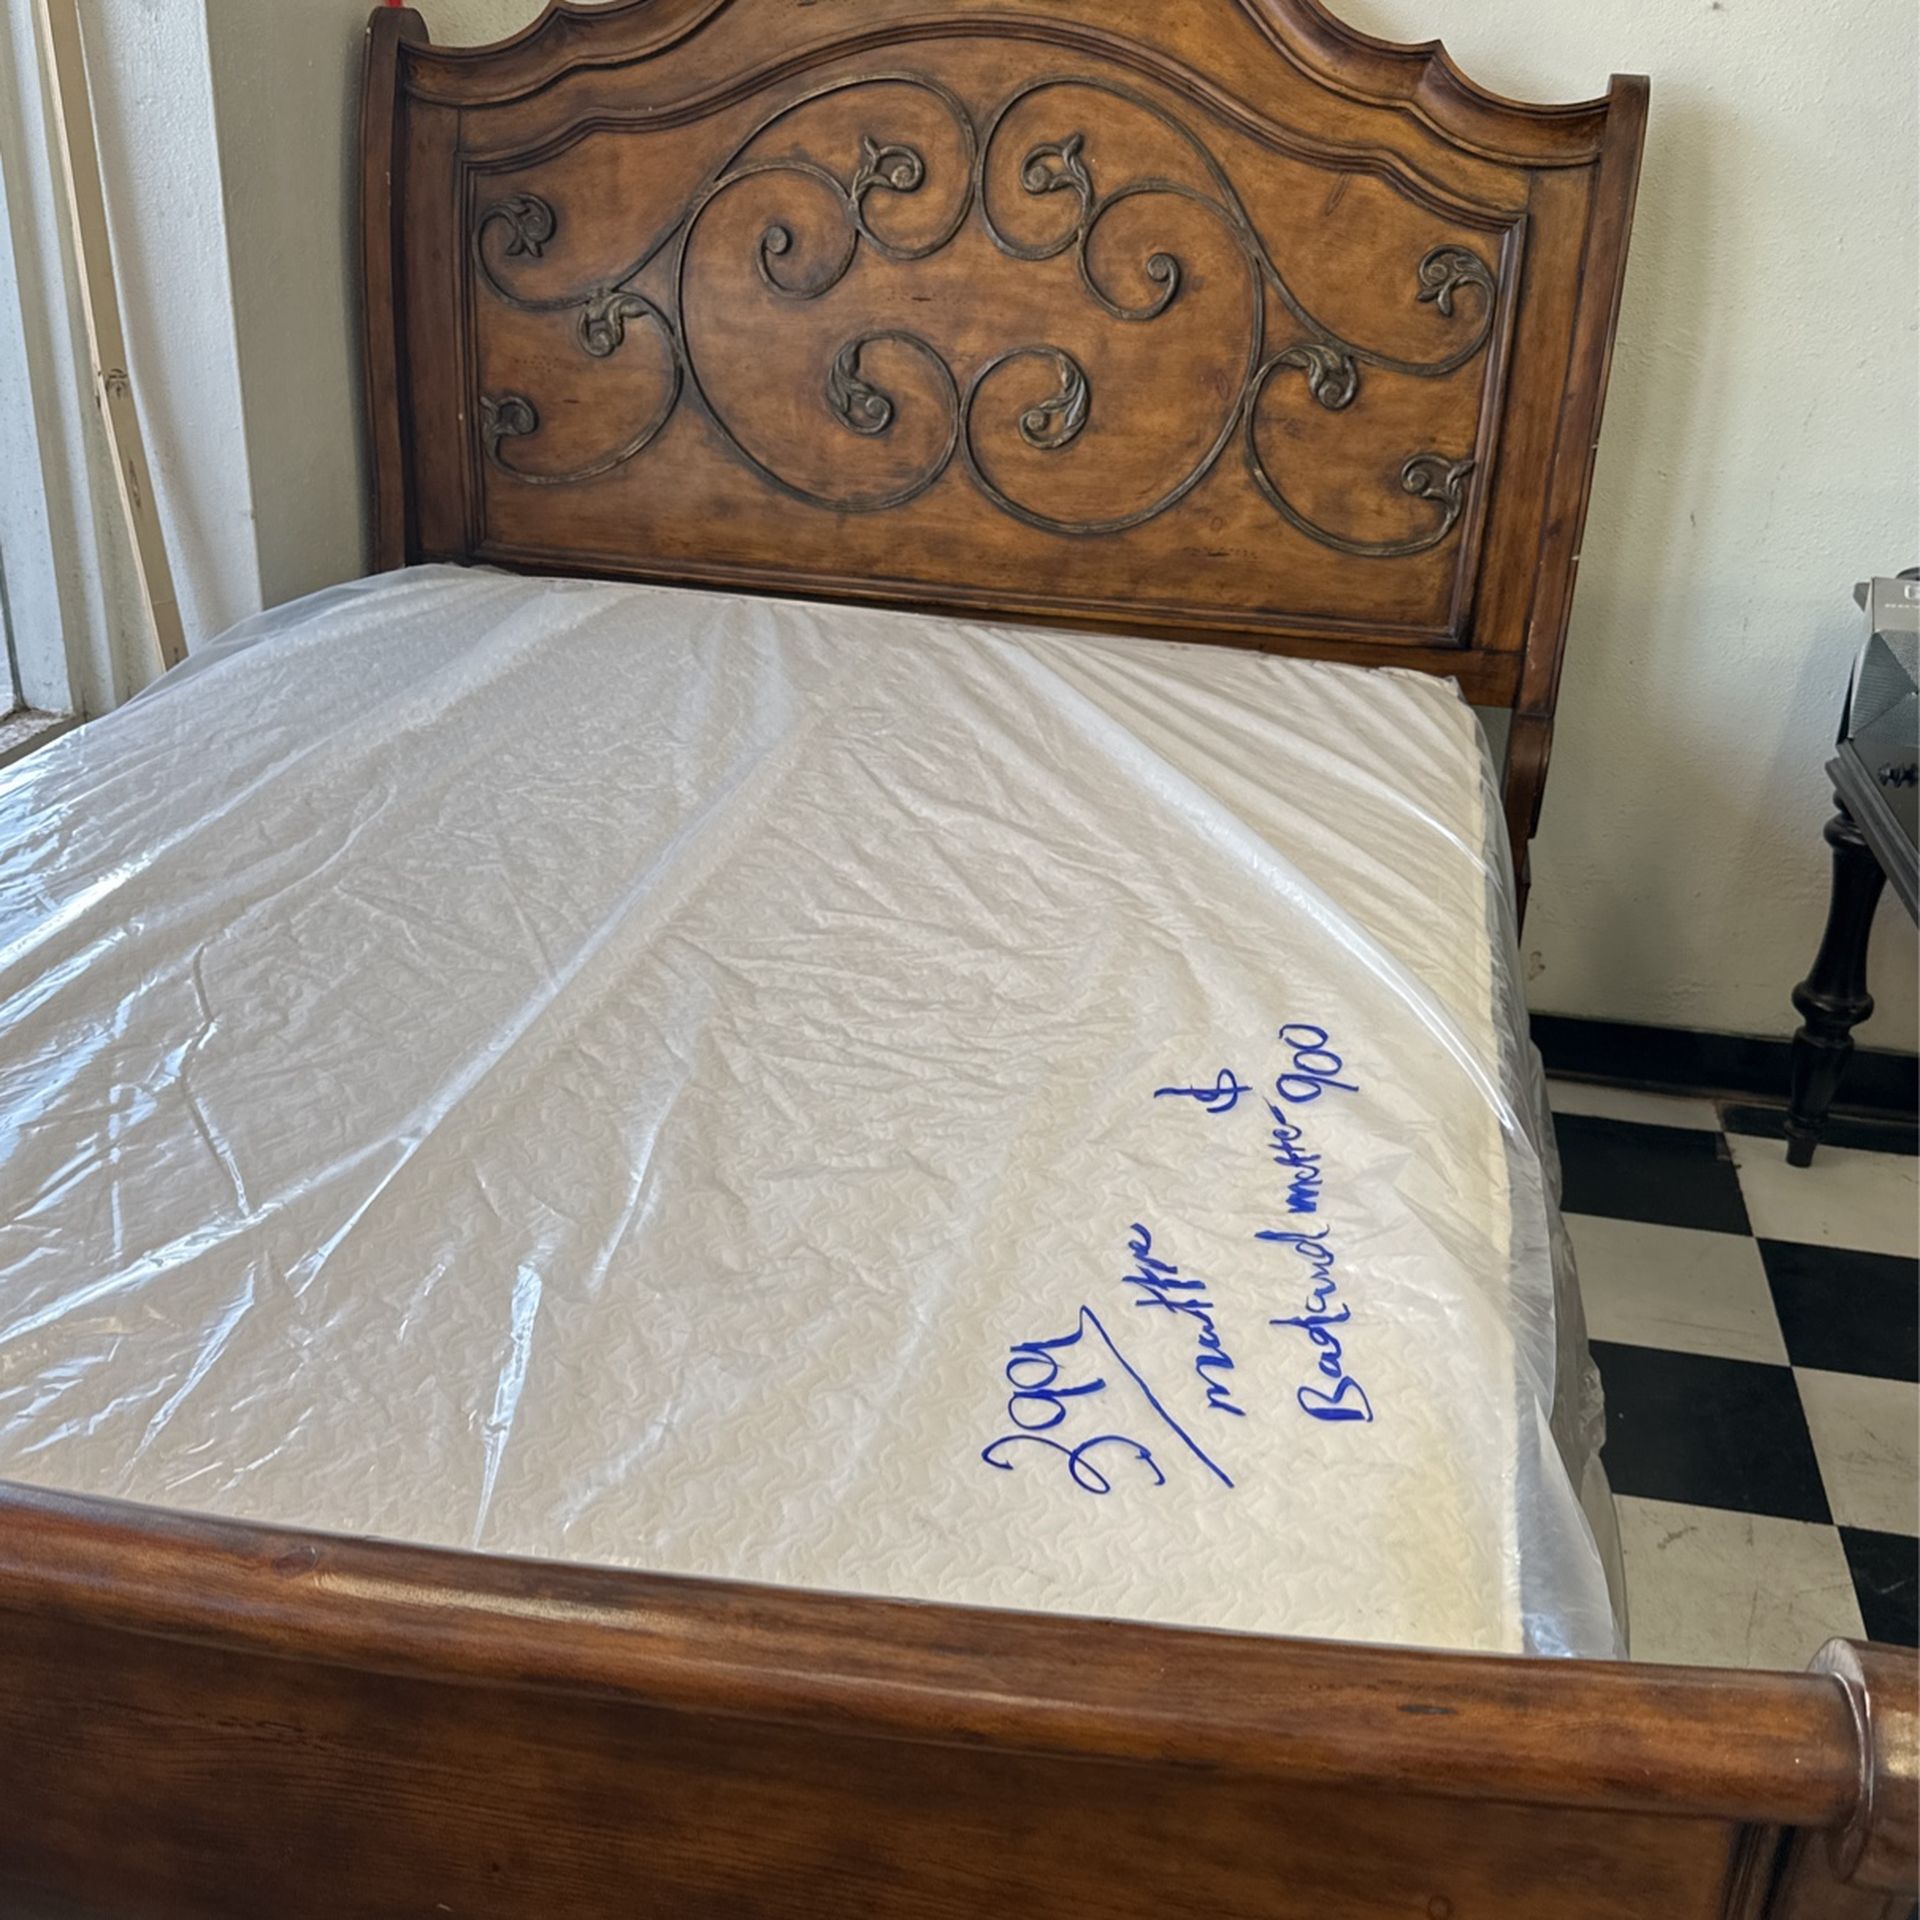 Queen Size Bed With Mattress